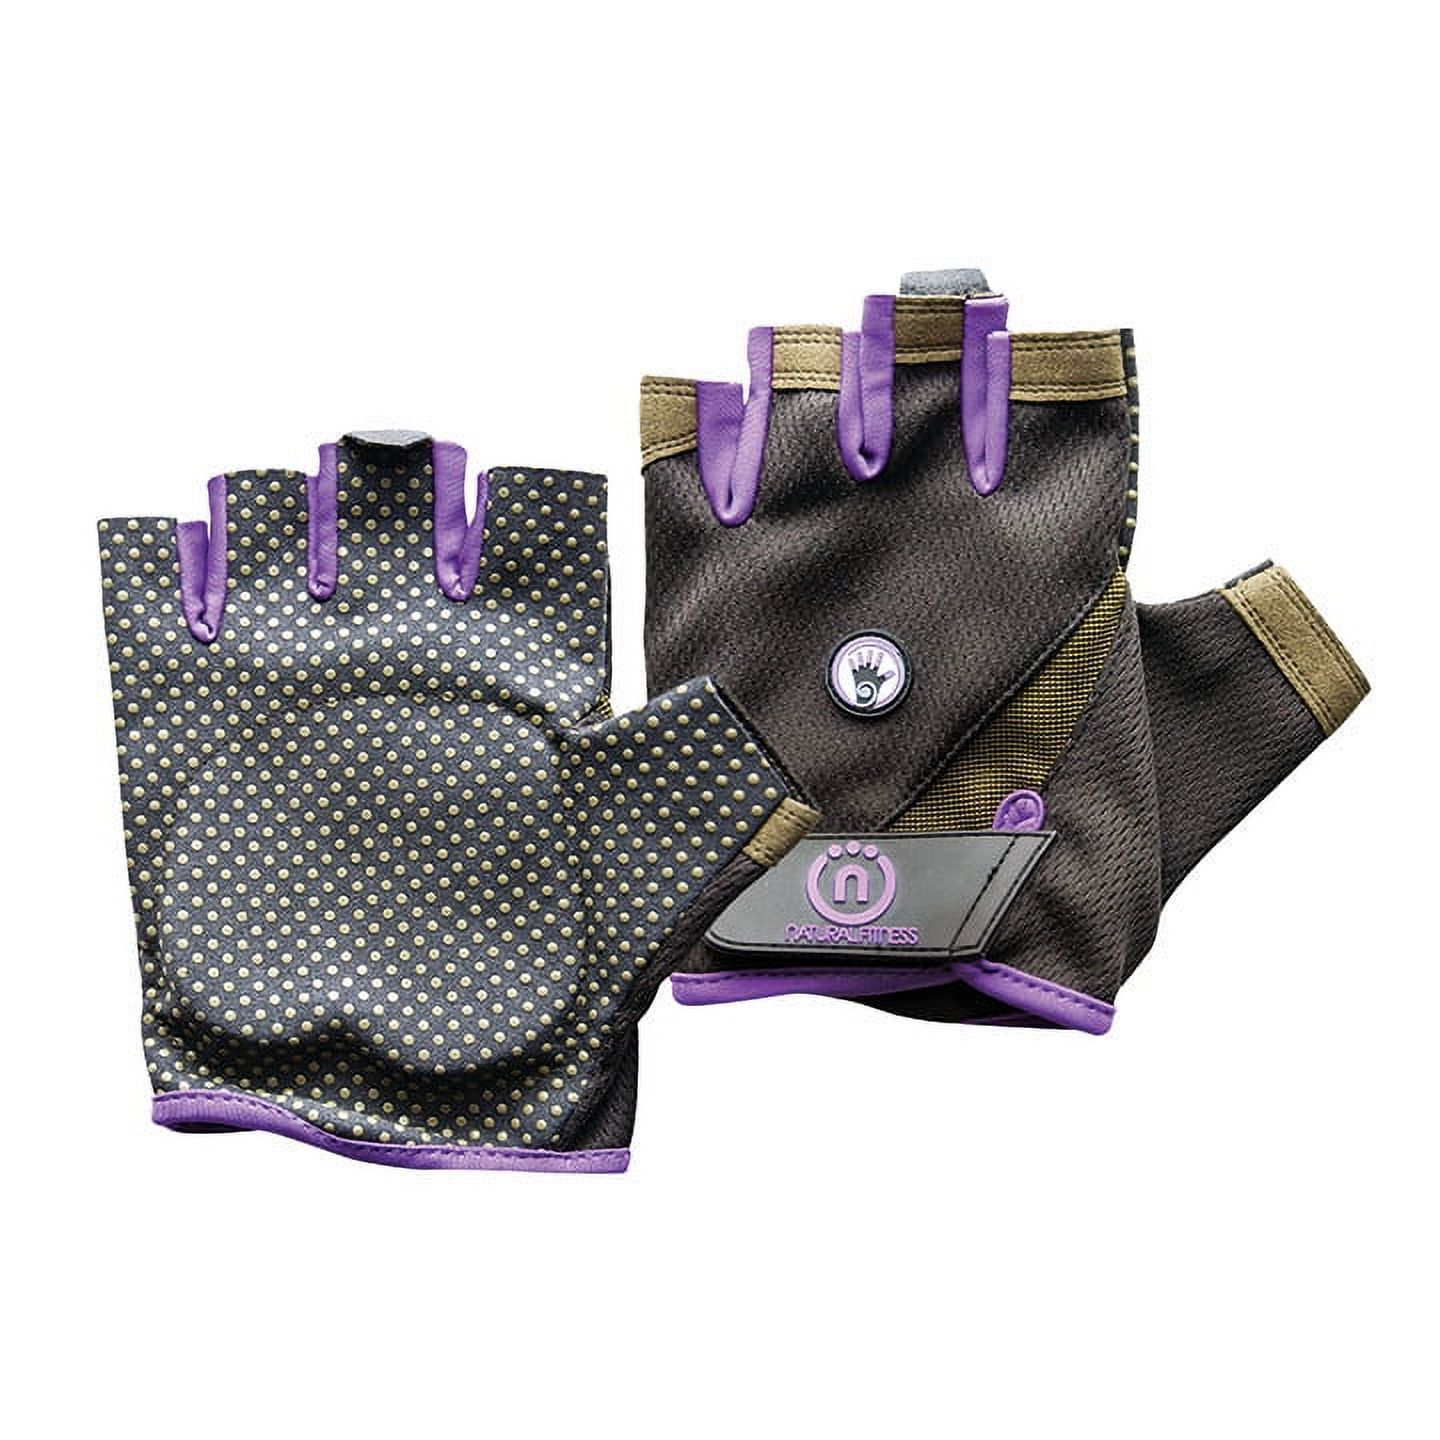 Natural Fitness Wrist Assist Gloves for Extra Support Needed During Yoga, Pilates, Weight-Training, and More ? Large - image 1 of 3